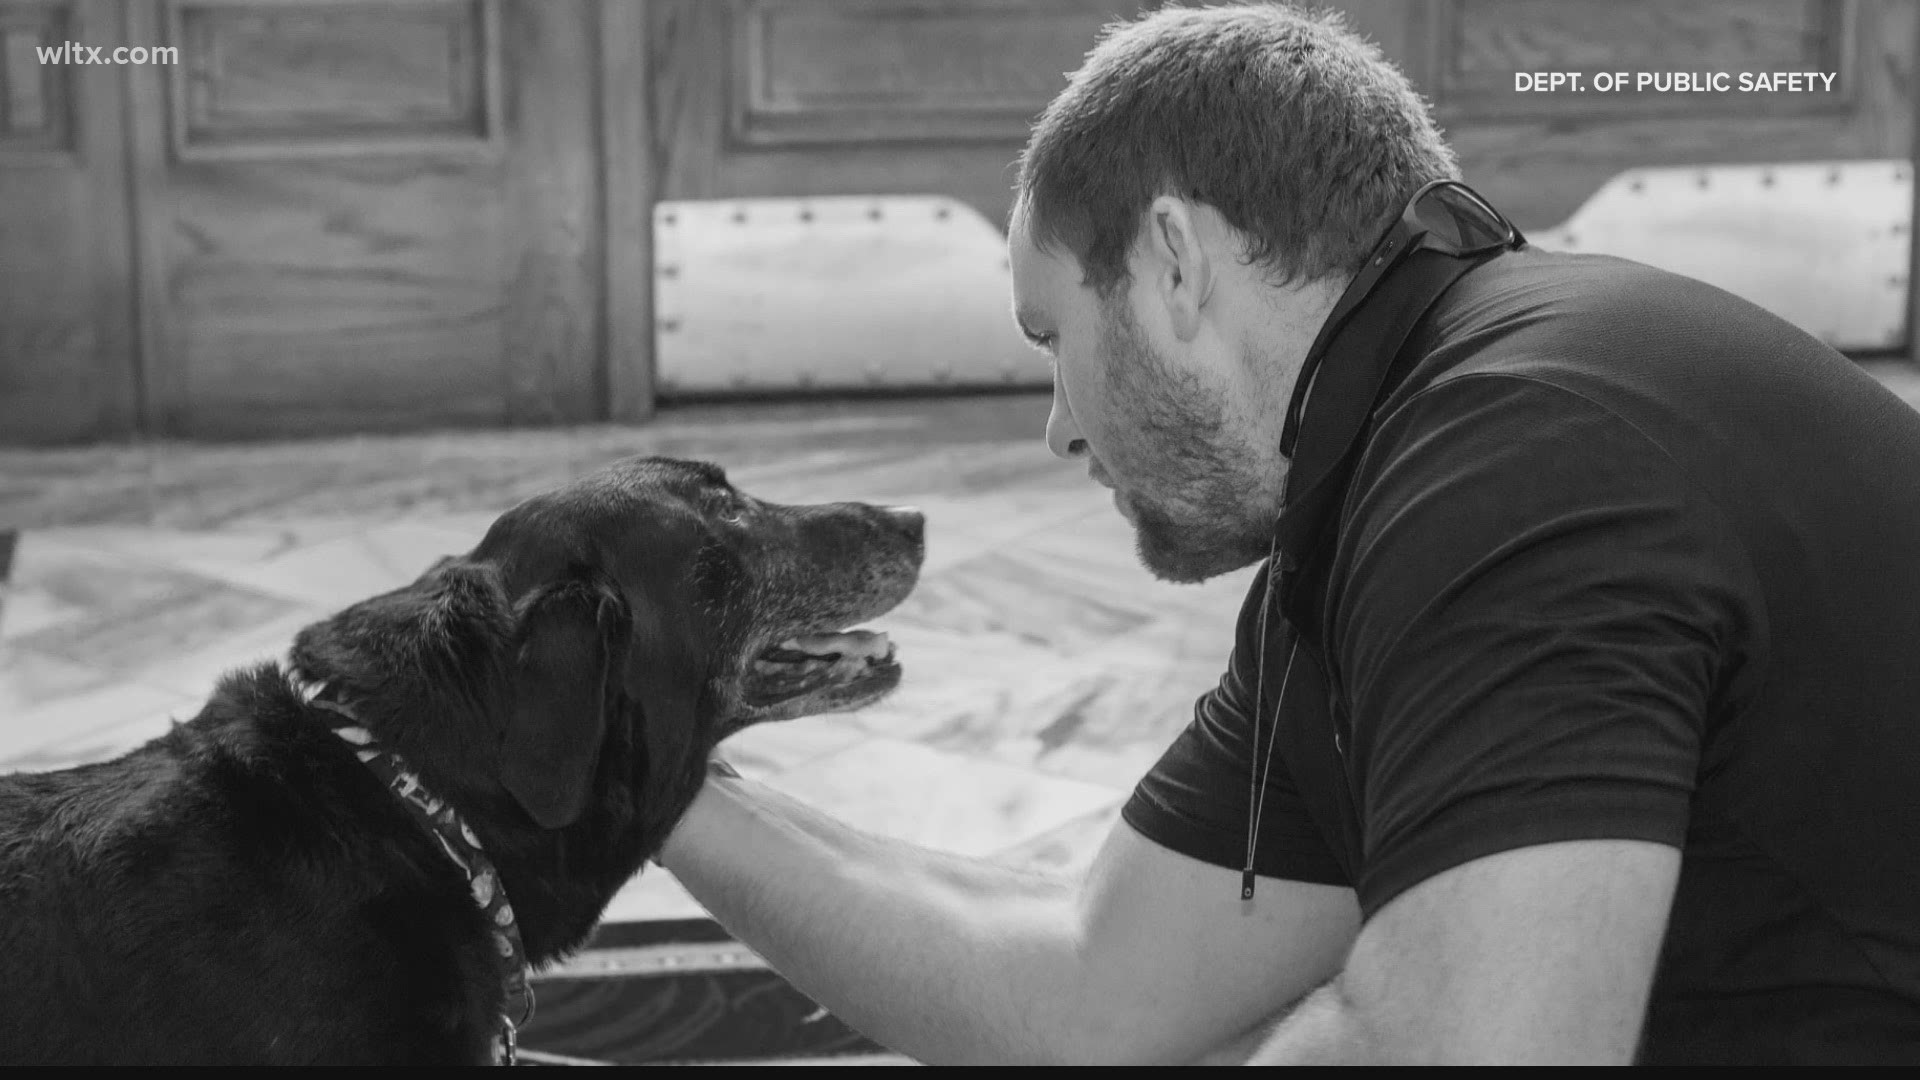 Joseph Graves served in the Marines from 2012 to 2016. When he joined, he was paired with his canine, Cane.  They served in Afghanistan but parted ways after tour.